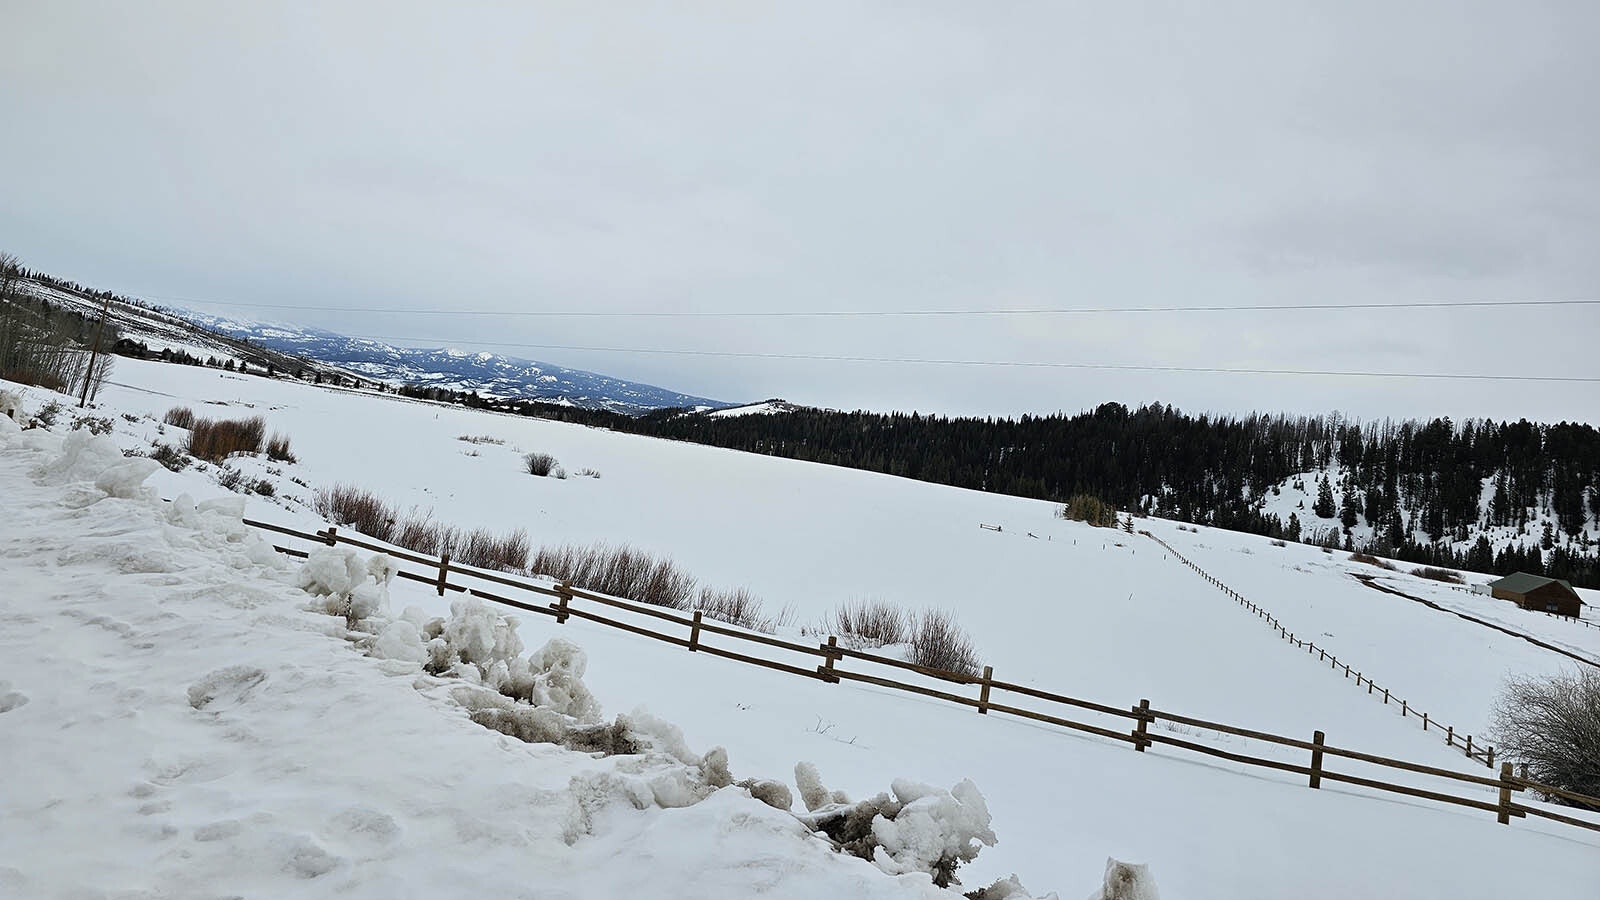 One of the property lines for the ranch Joe Ricketts owns in Sublette County. Ricketts is planning to build a resort in the area, which he has taken to calling "Little Jackson Hole."